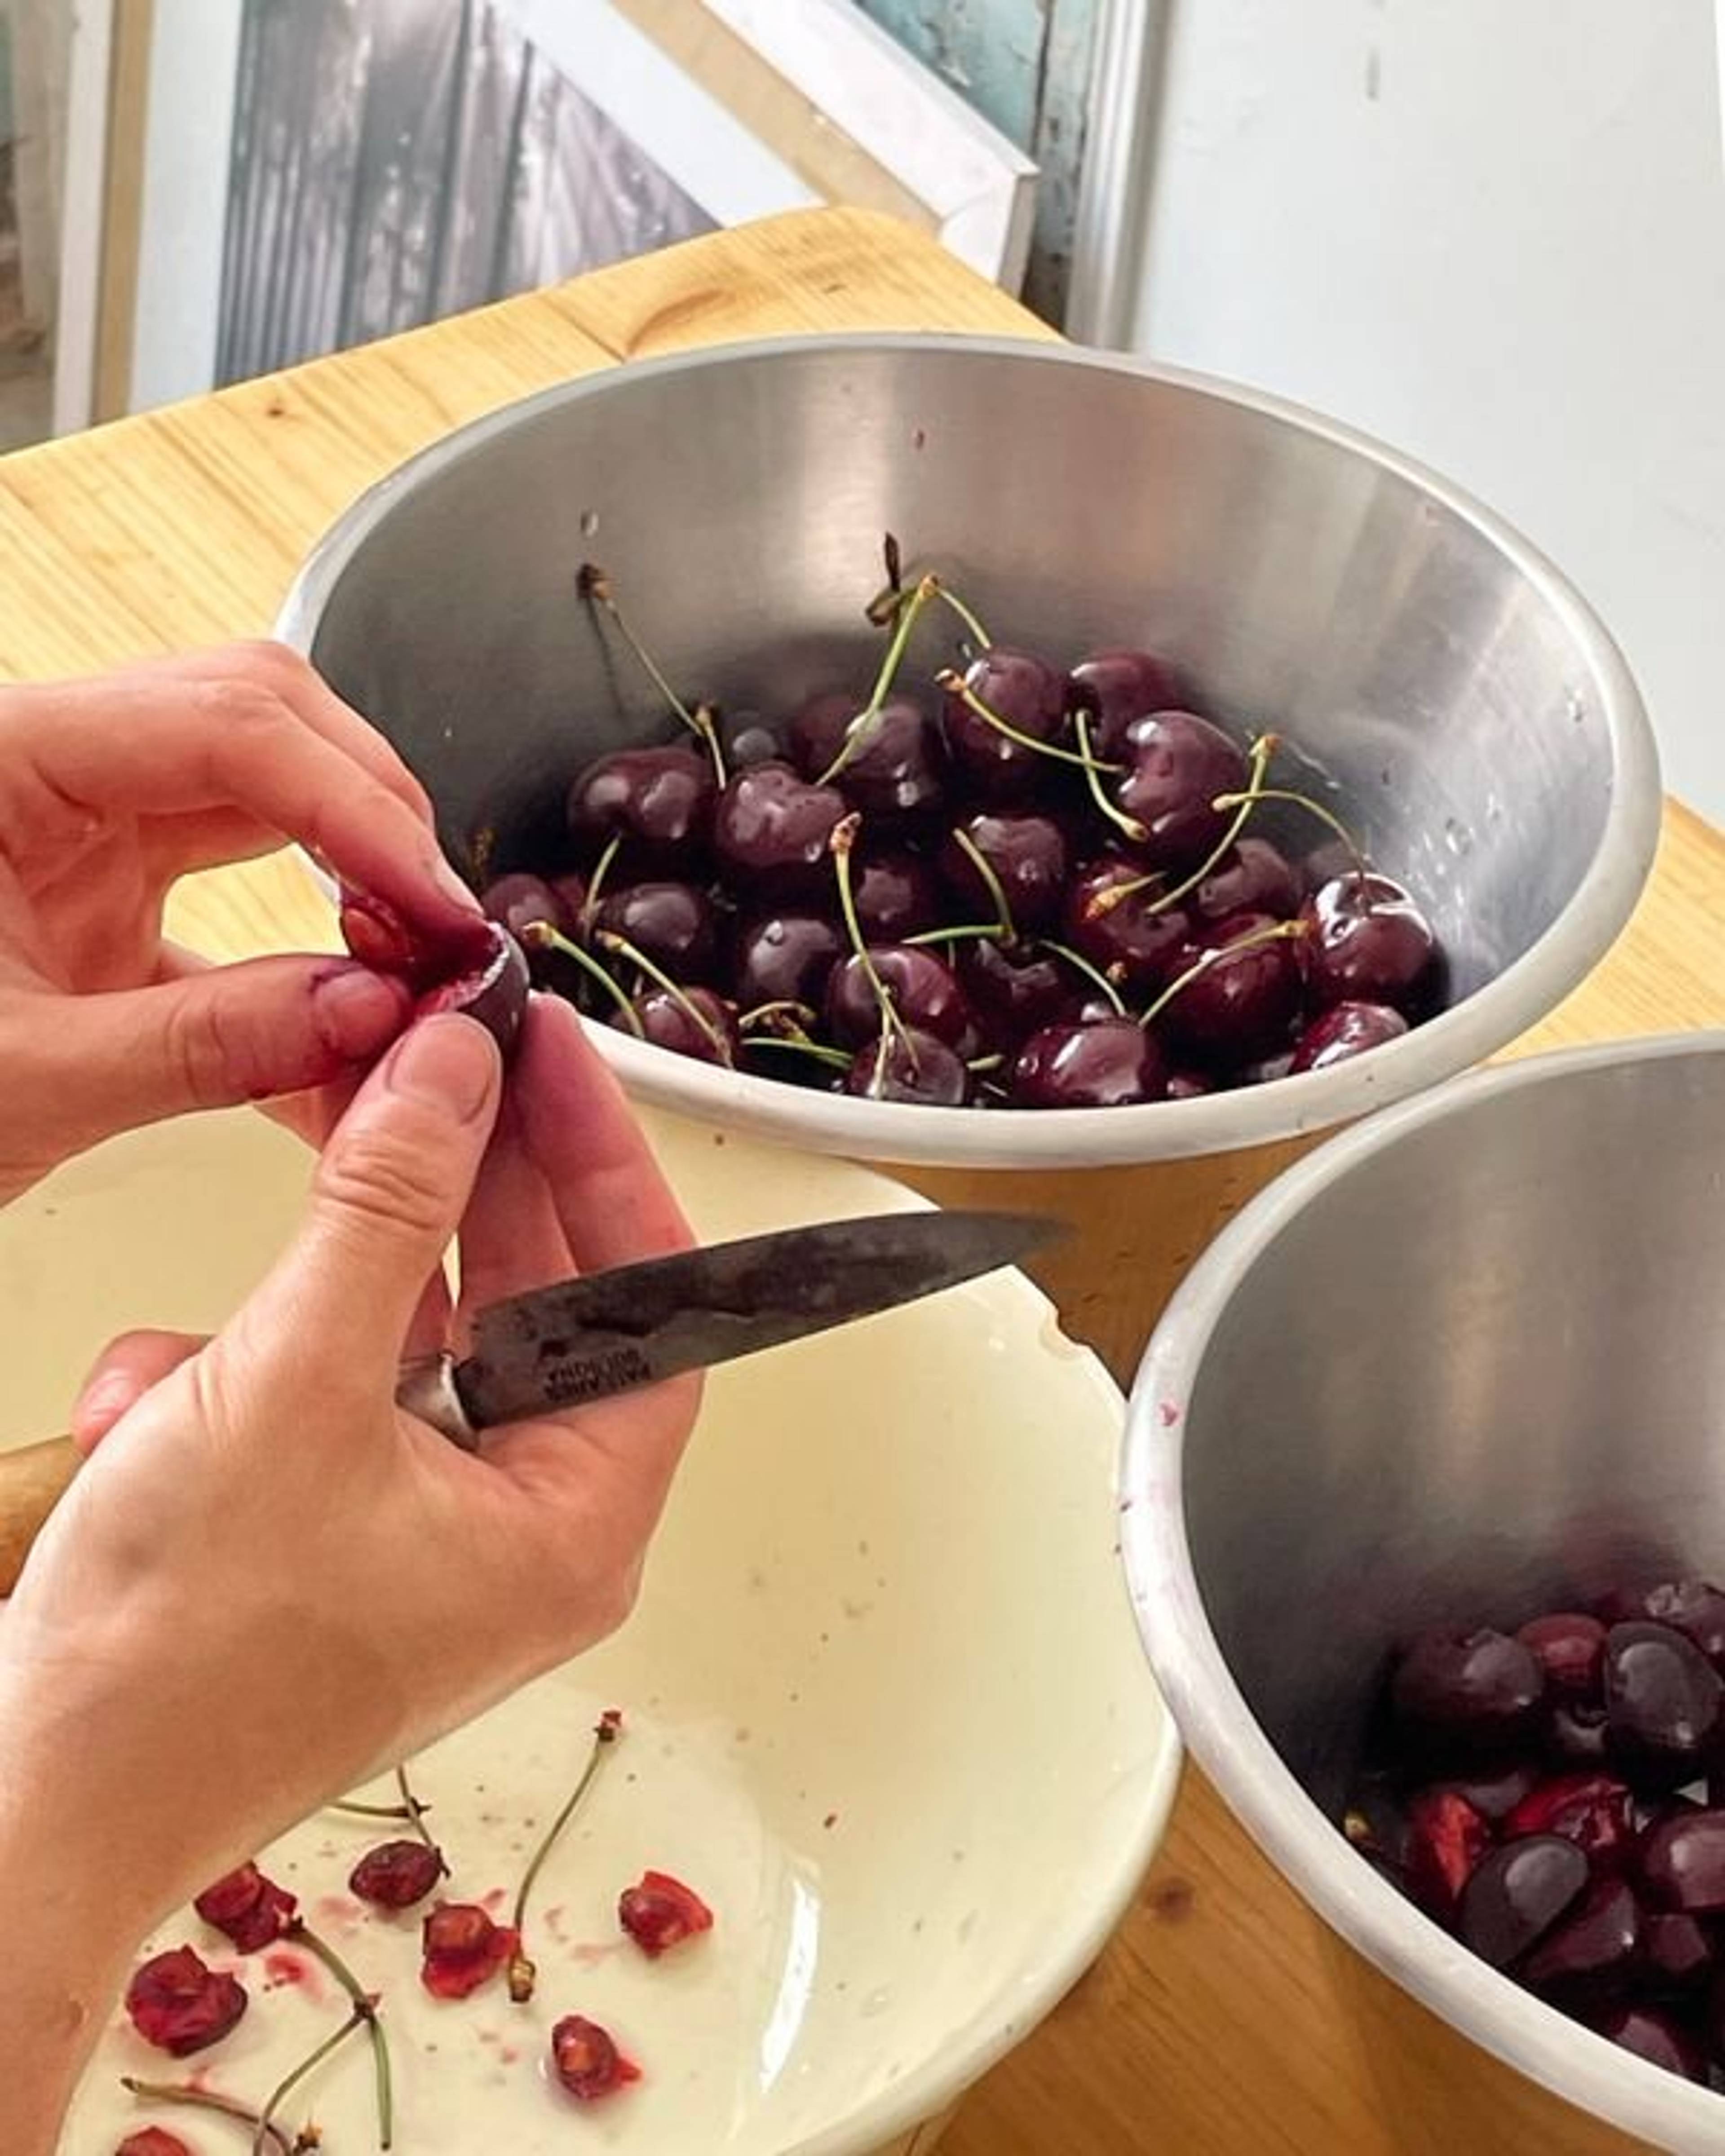 slicing cherries in half and transferring to a silver bowl